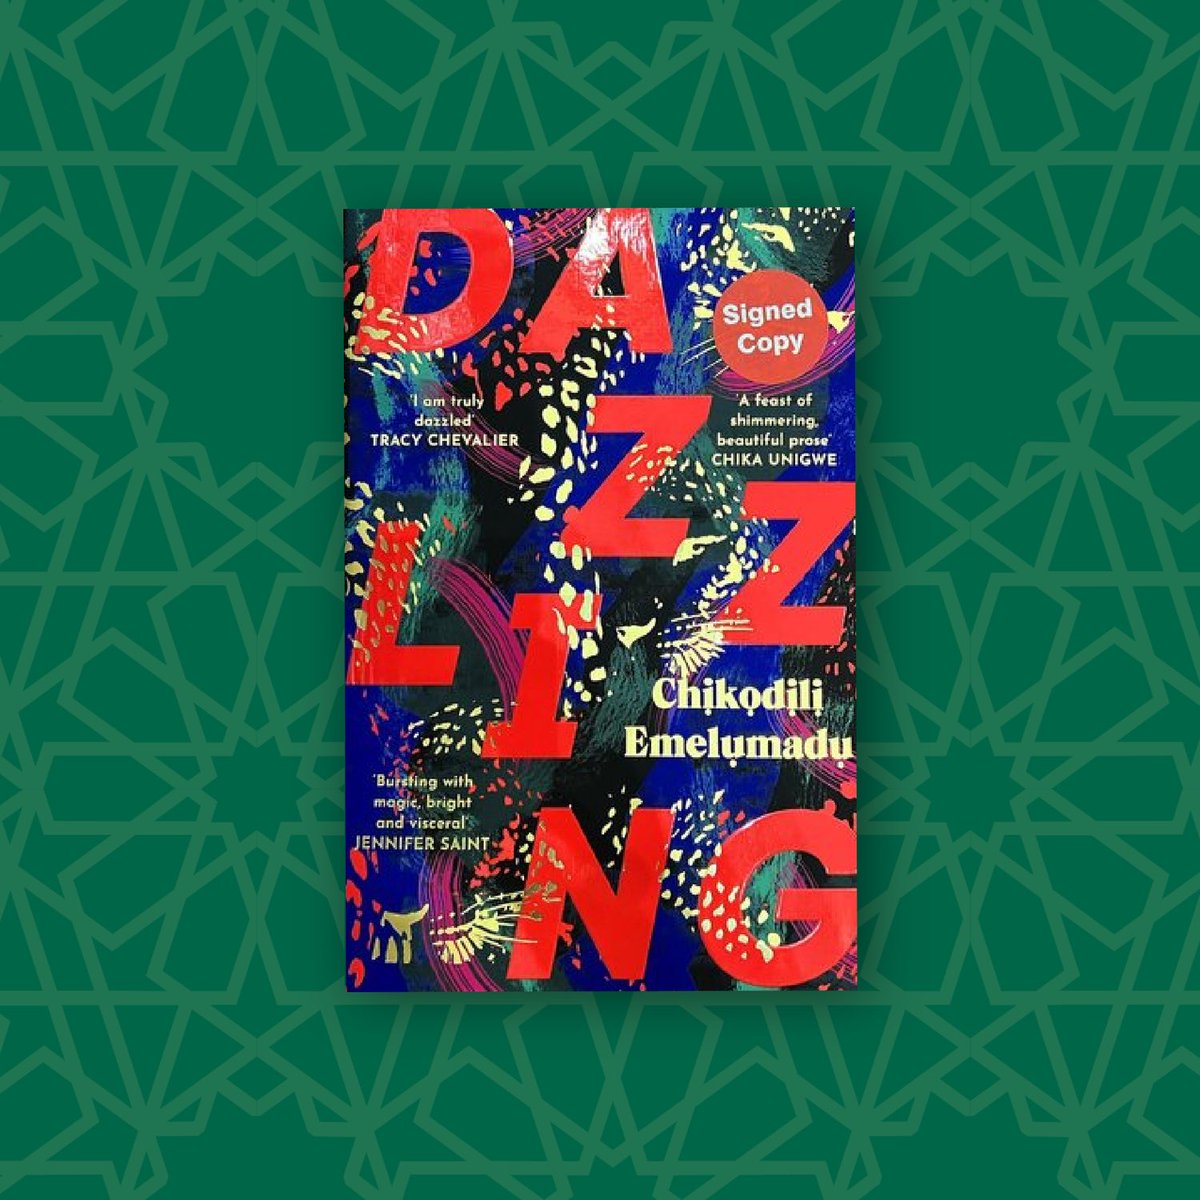 Happy birthday to the wonderful @chemelumadu! Make her day by getting a copy of her stunning debut novel Dazzling if you haven’t already ✨